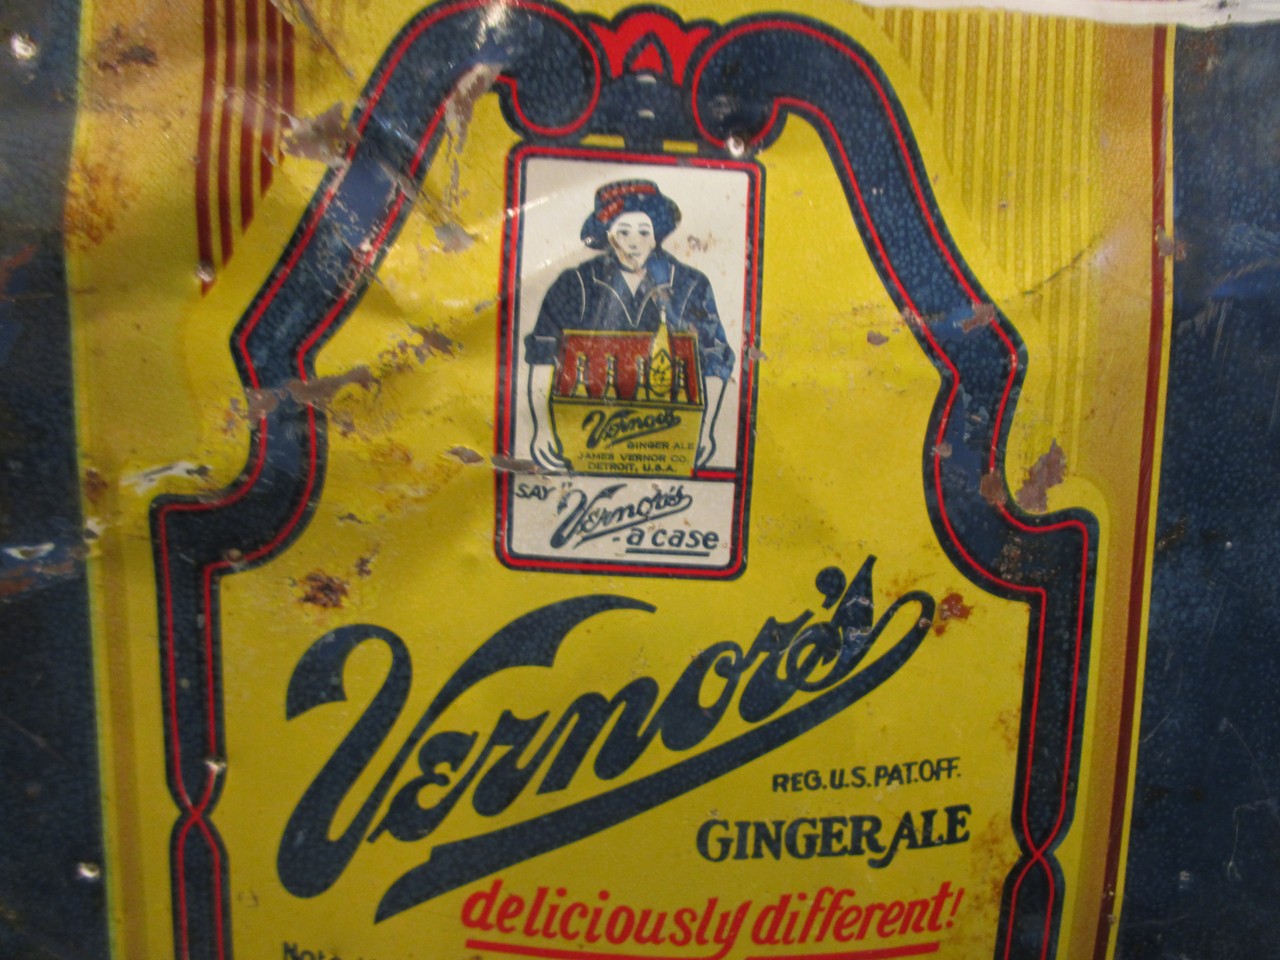 Vernors collector to uncap the history of the drink in Port Huron